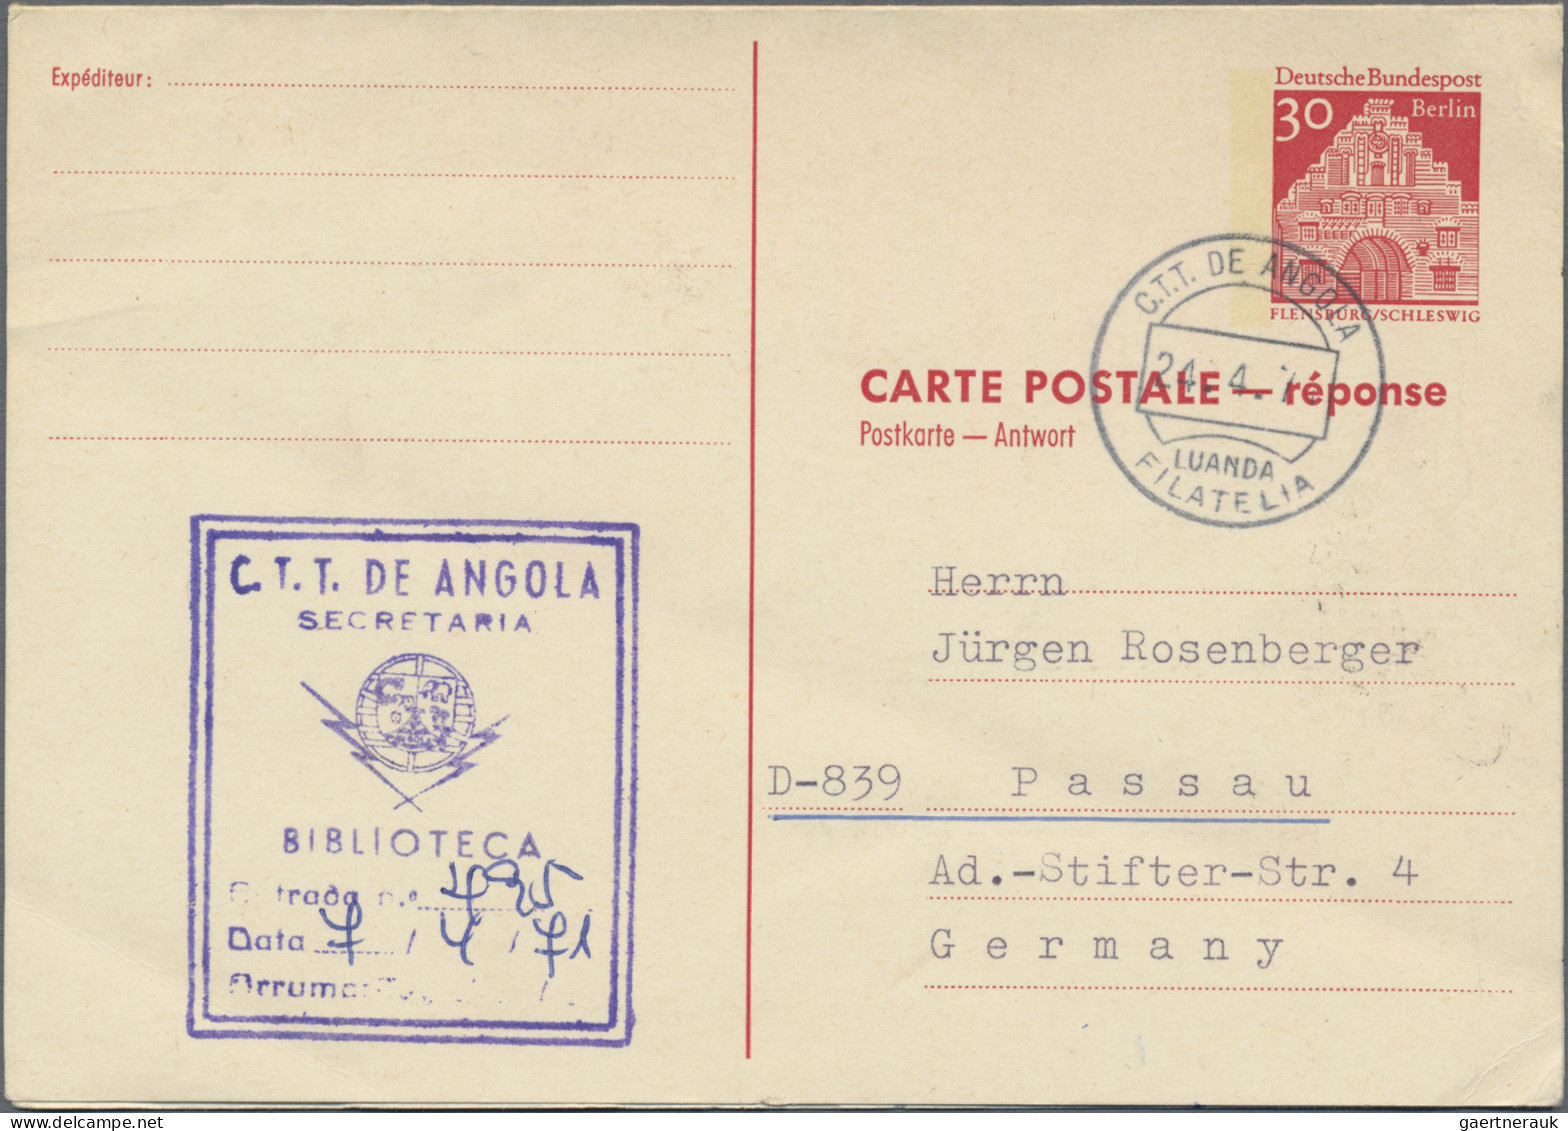 Africa: 1970/1971, West Berlin: 30/30 Pf Red 'buildings' Postal Stationery Reply - Africa (Other)